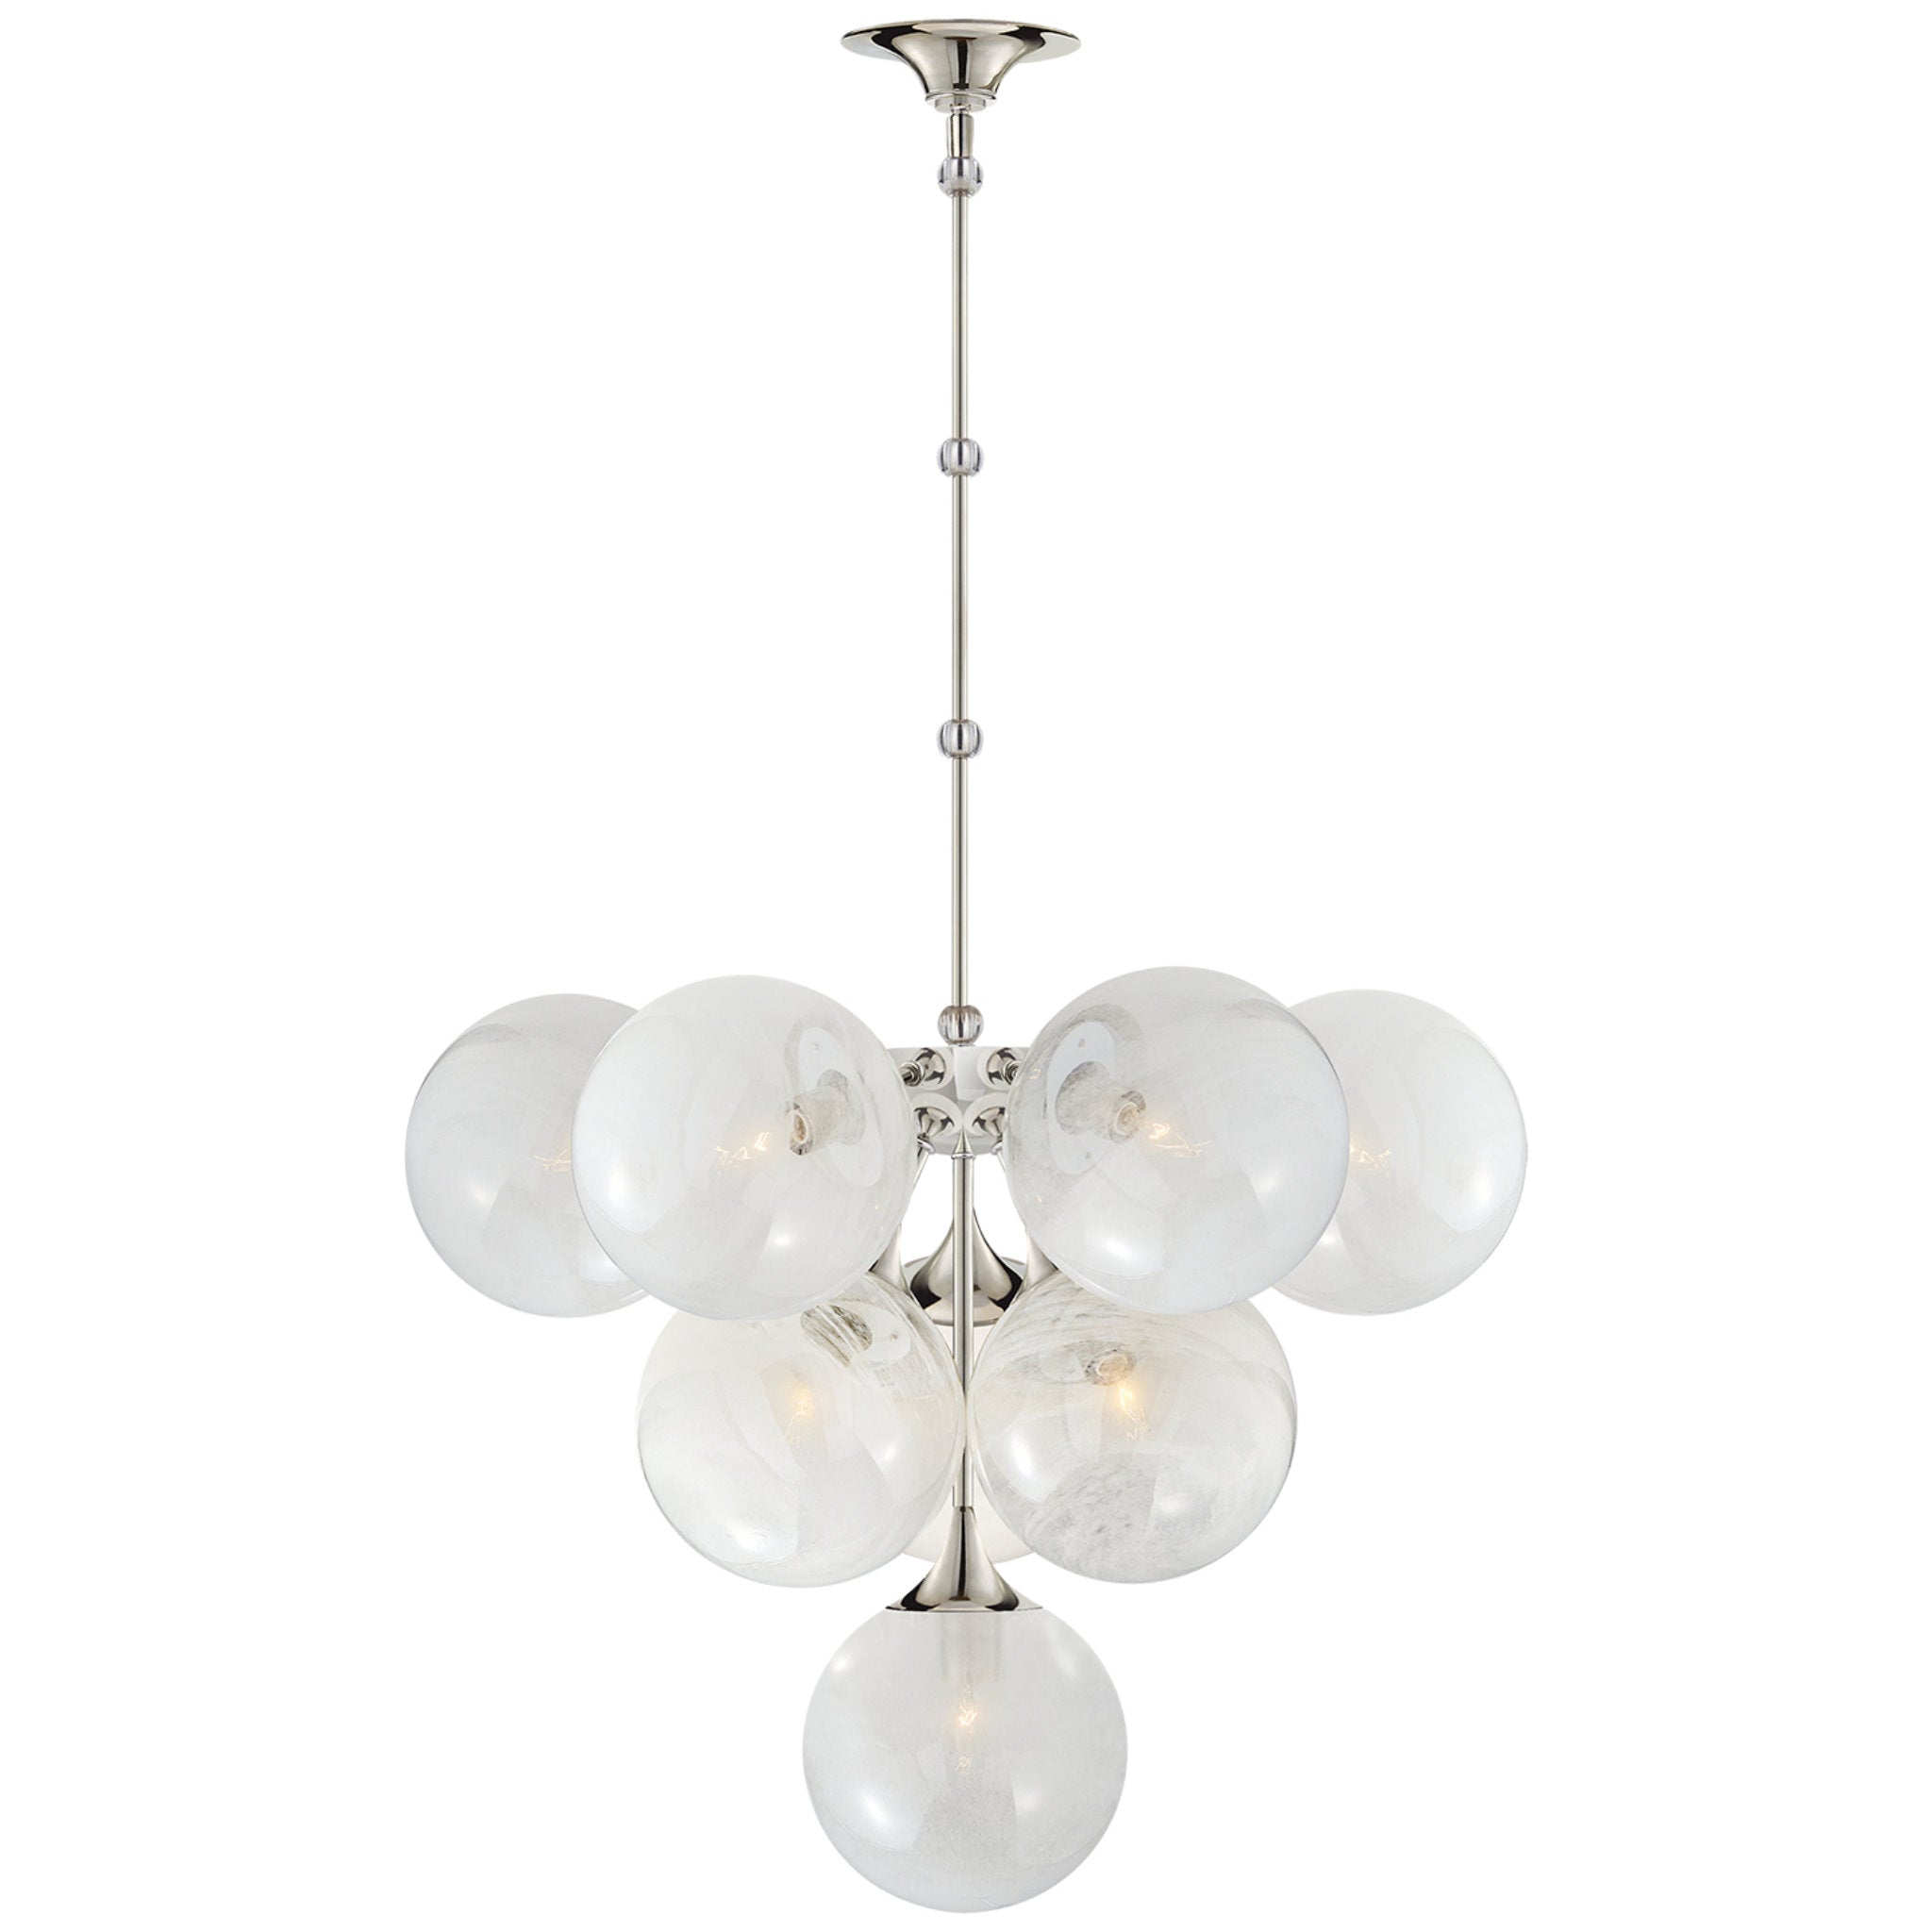 AERIN Cristol Tiered Chandelier in Polished Nickel with White Strie Glass